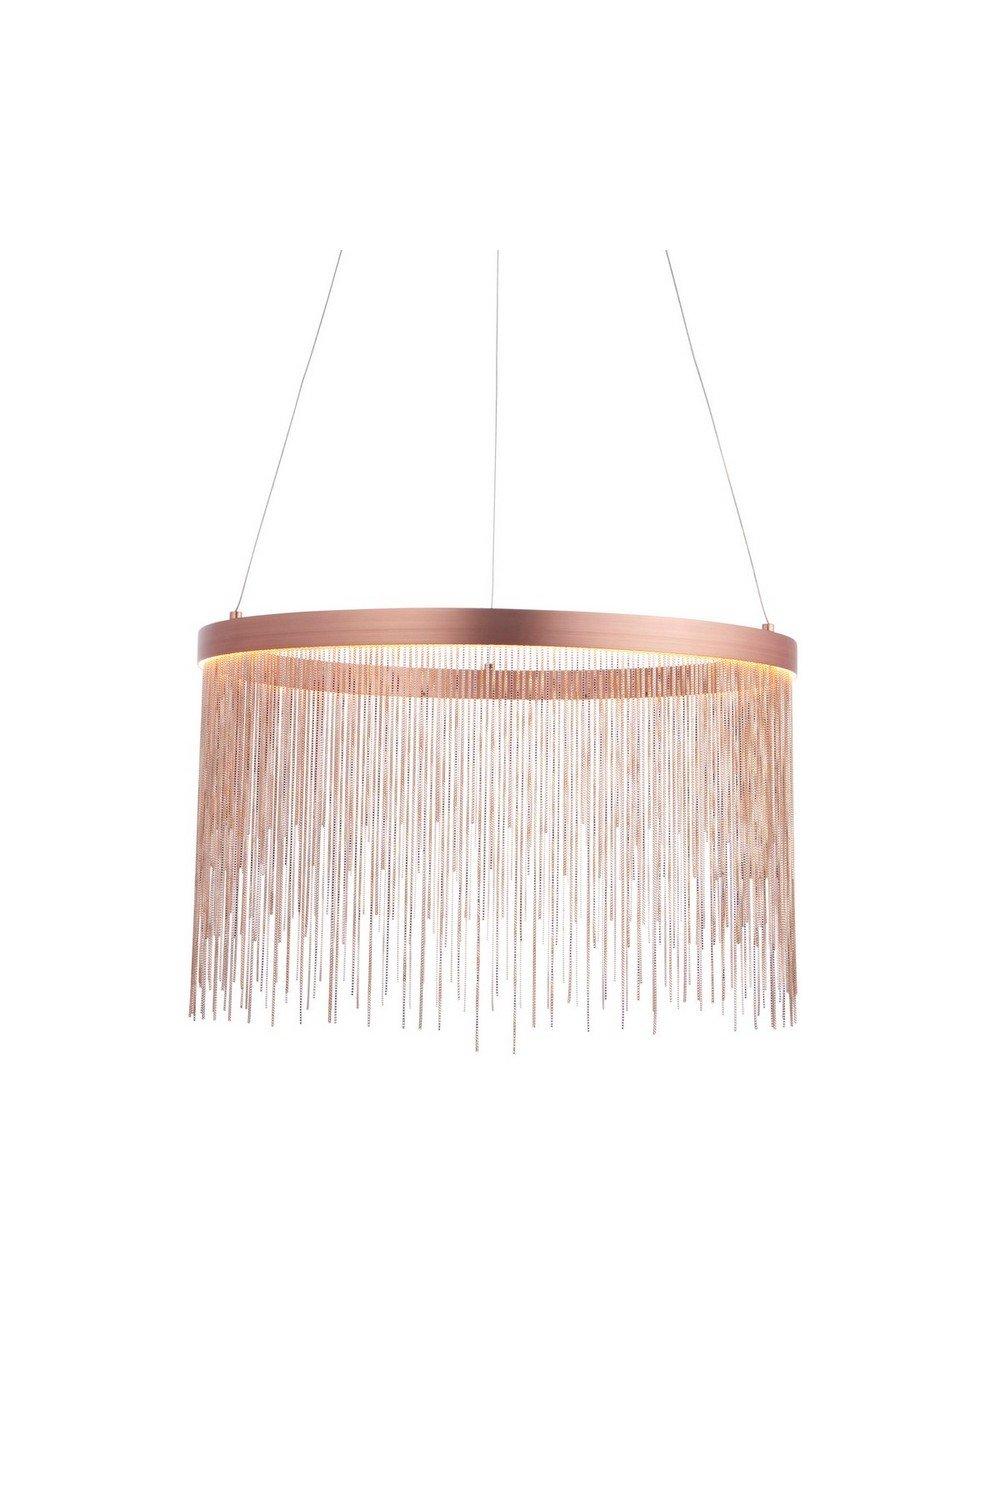 Zelma LED Pendant Light Fine Copper Chain Waterfall Effect Brushed Copper Warm White